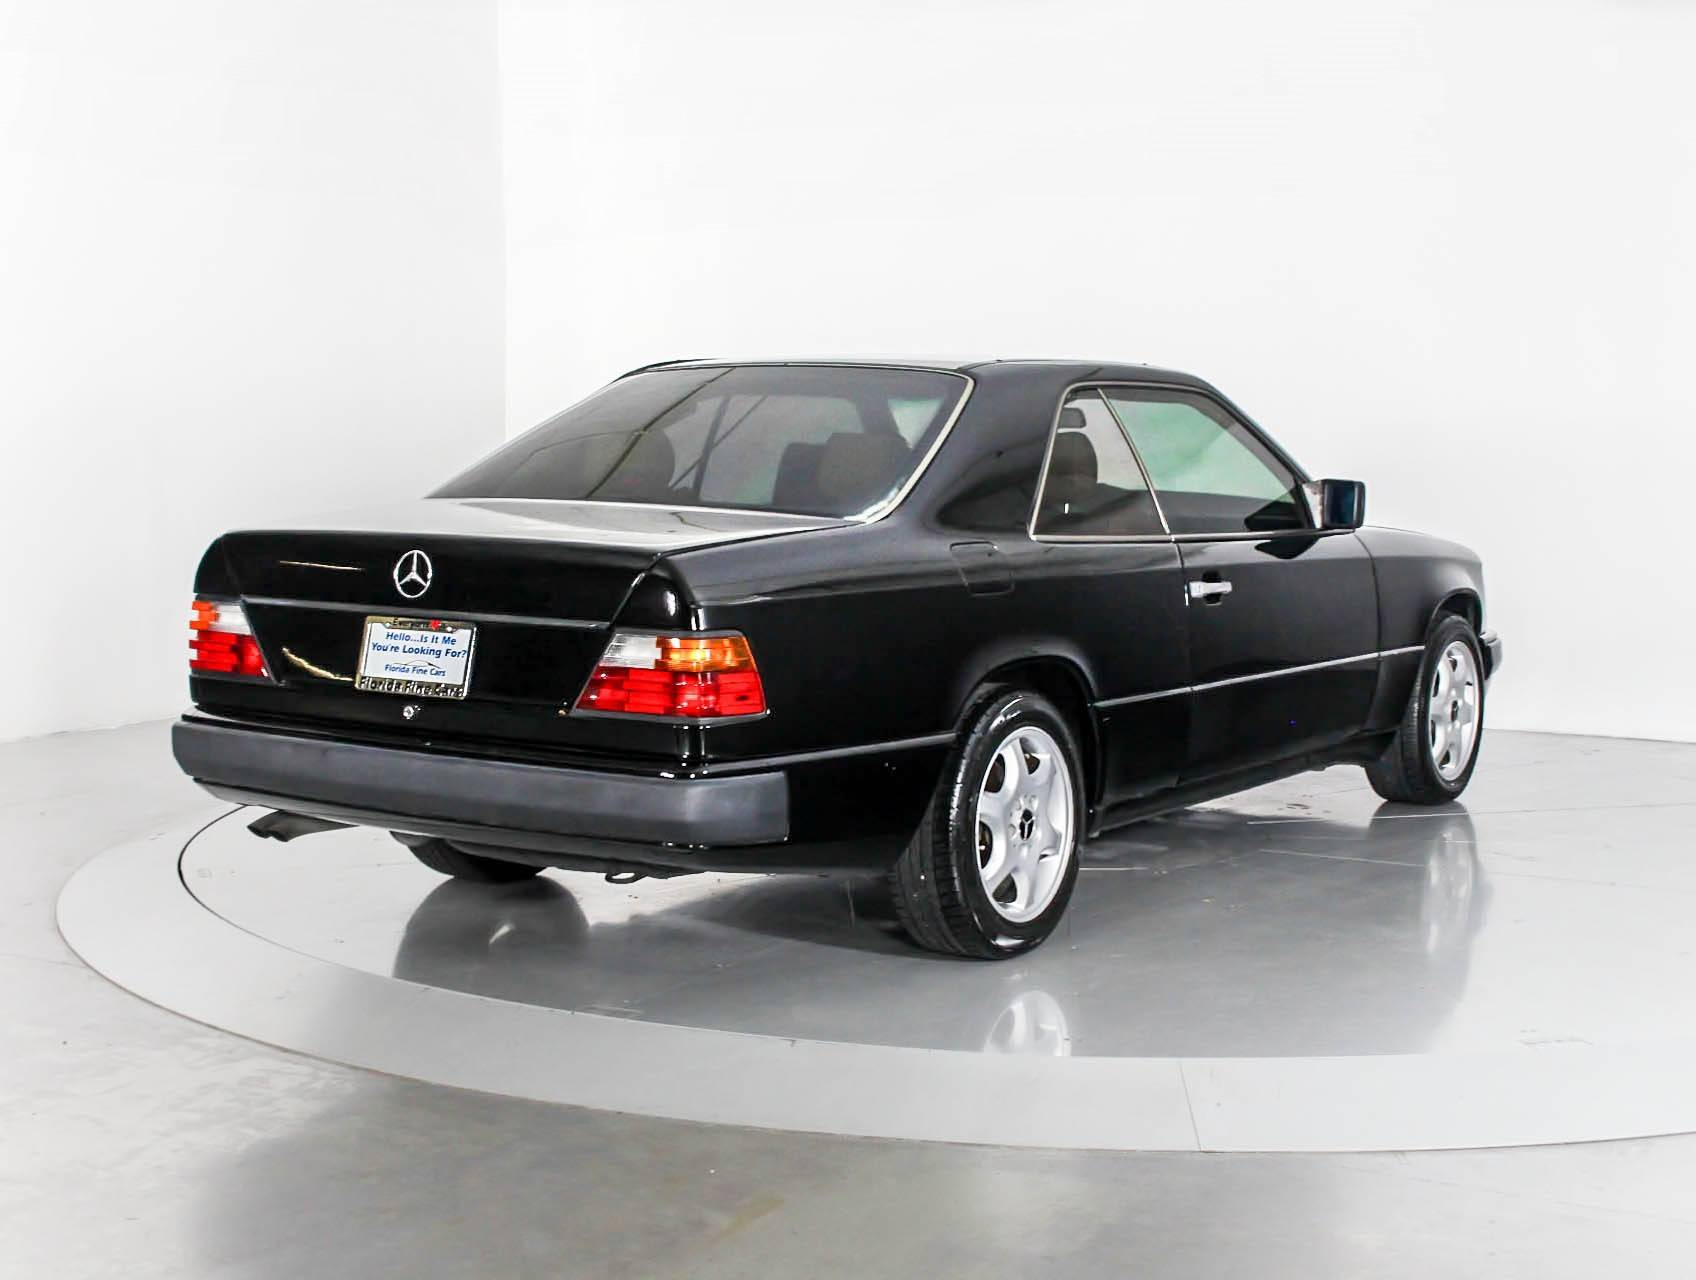 Florida Fine Cars - Used MERCEDES-BENZ 300 1989 WEST PALM 300CE